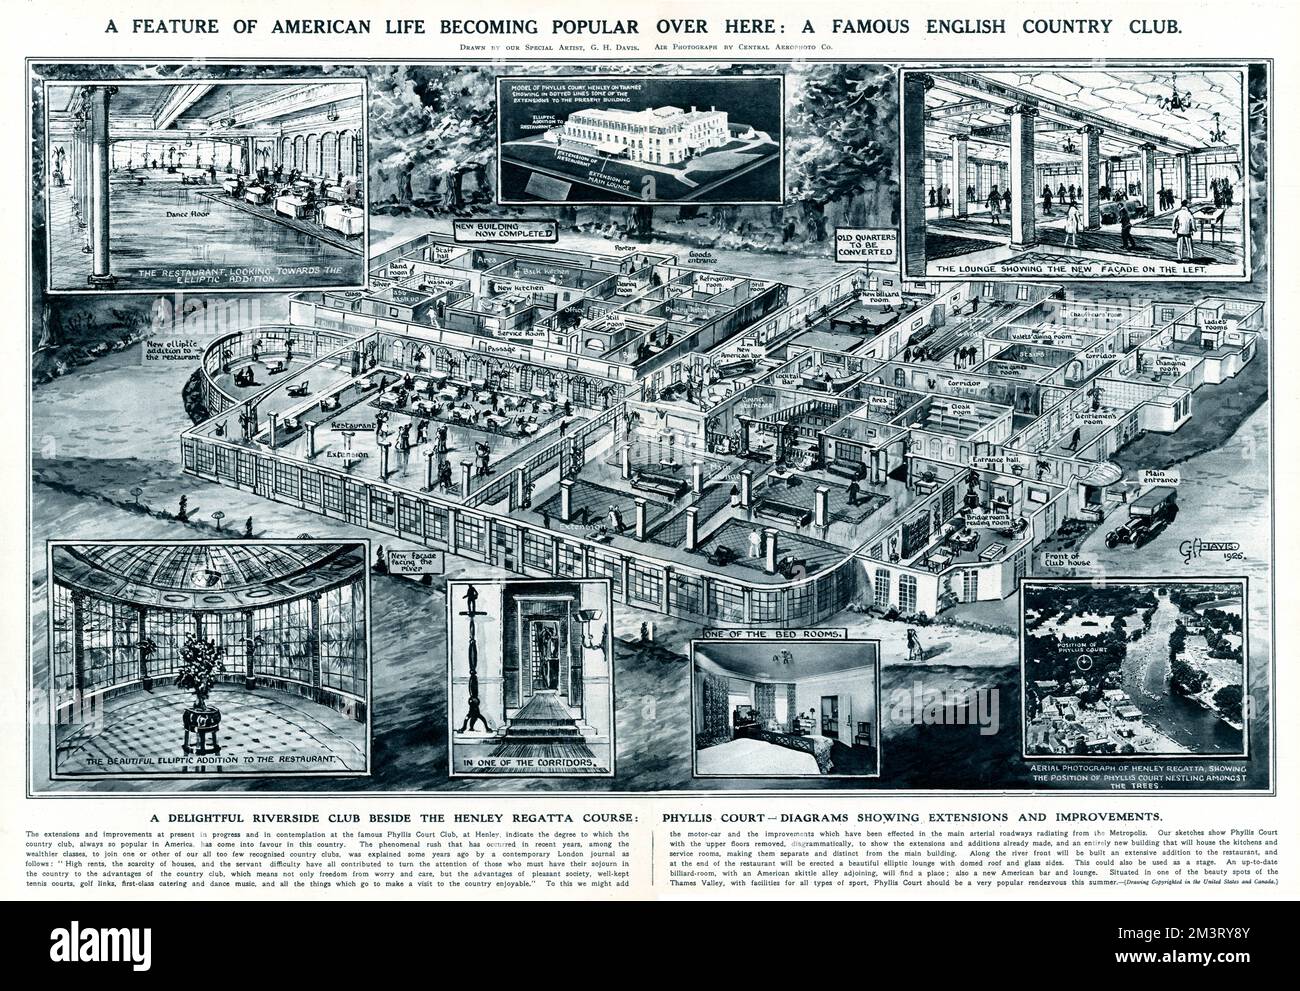 Detailed diagrammatic illustration by G. H. Davis in The Illustrated London News of Phyllis Court, a so-called riverside 'country club' at Henley, showing extensions and improvements made in 1926.  The ILN likens it to the American country club at a time when increasing car ownership and improved road networks was making motoring to entertainment complexes a fashionable pastime.  The inter-war period saw many existing inns, hotels and riverside clubs extend their facilities, while a number of 'roadhouses' began to appear along main arterial roads.  G. H. Davis's cross-section shows Phylli Stock Photo